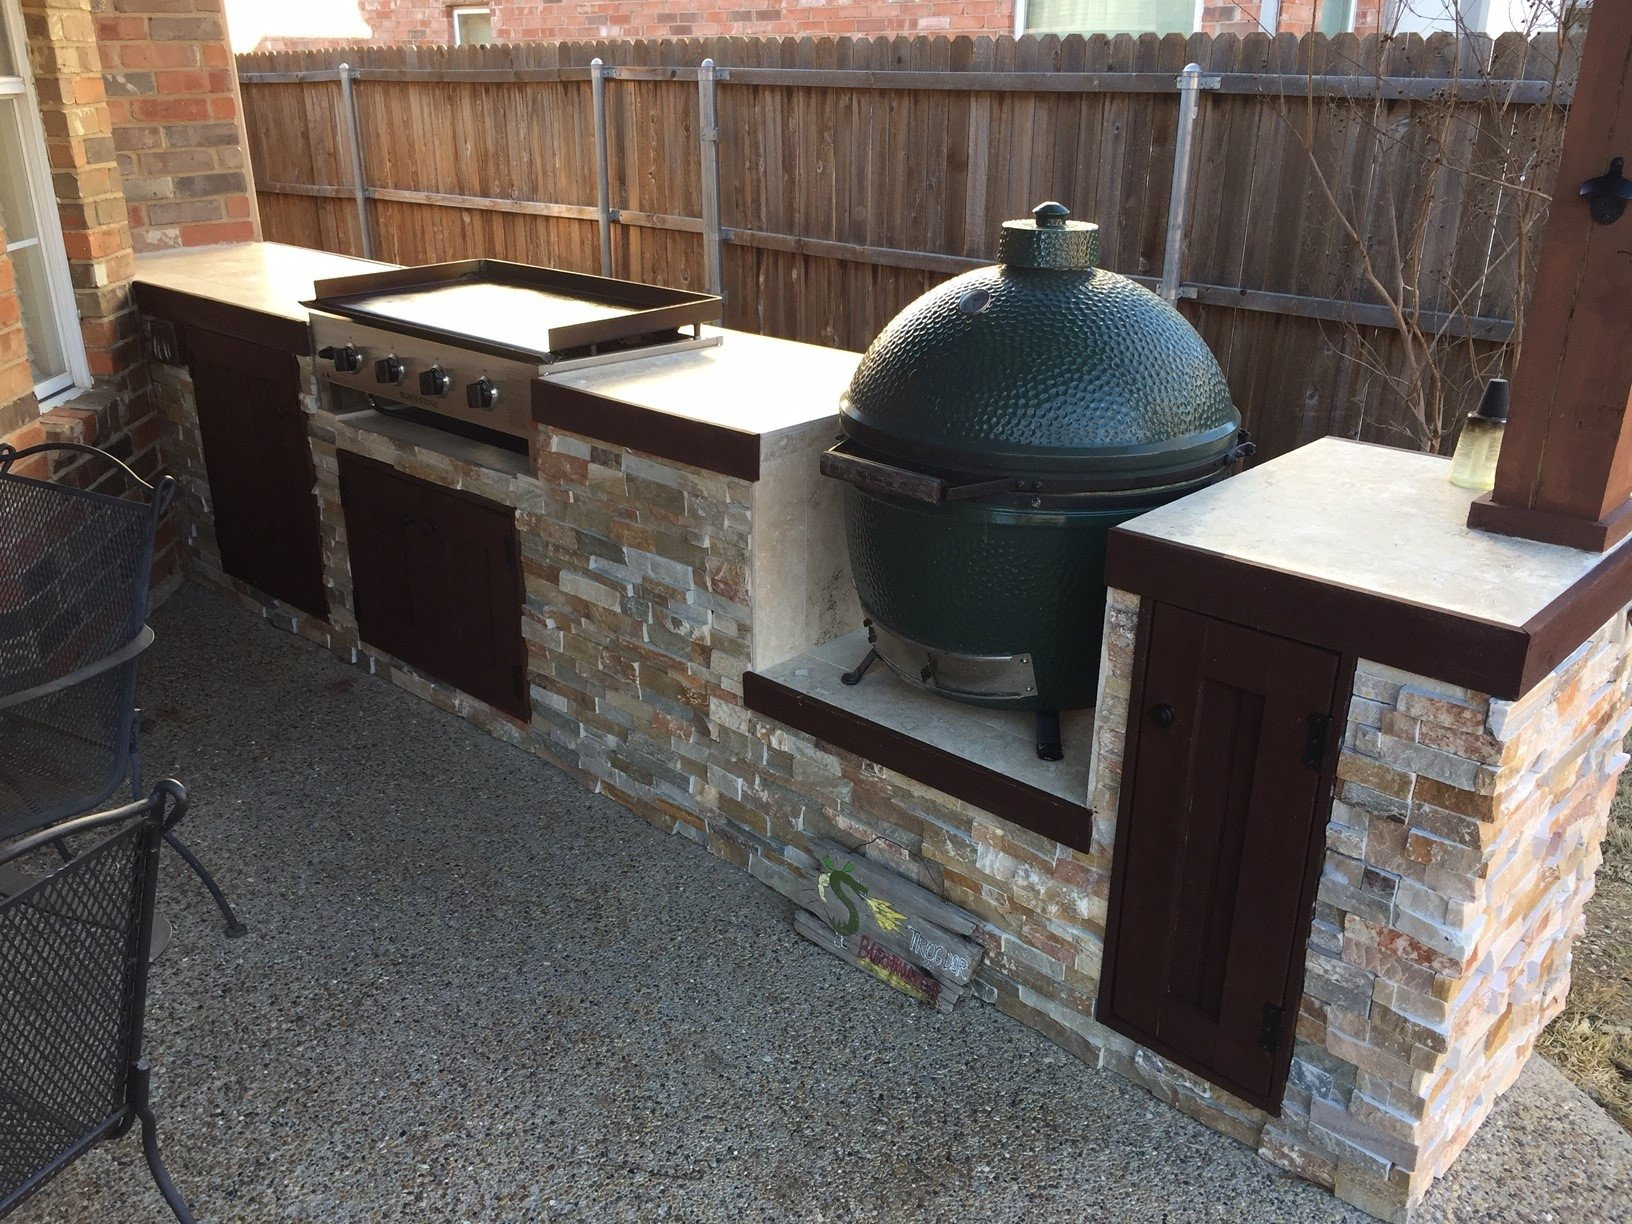 Outdoor Kitchen Griddle
 New Outdoor Kitchen & Covered Patio w Pics — Big Green